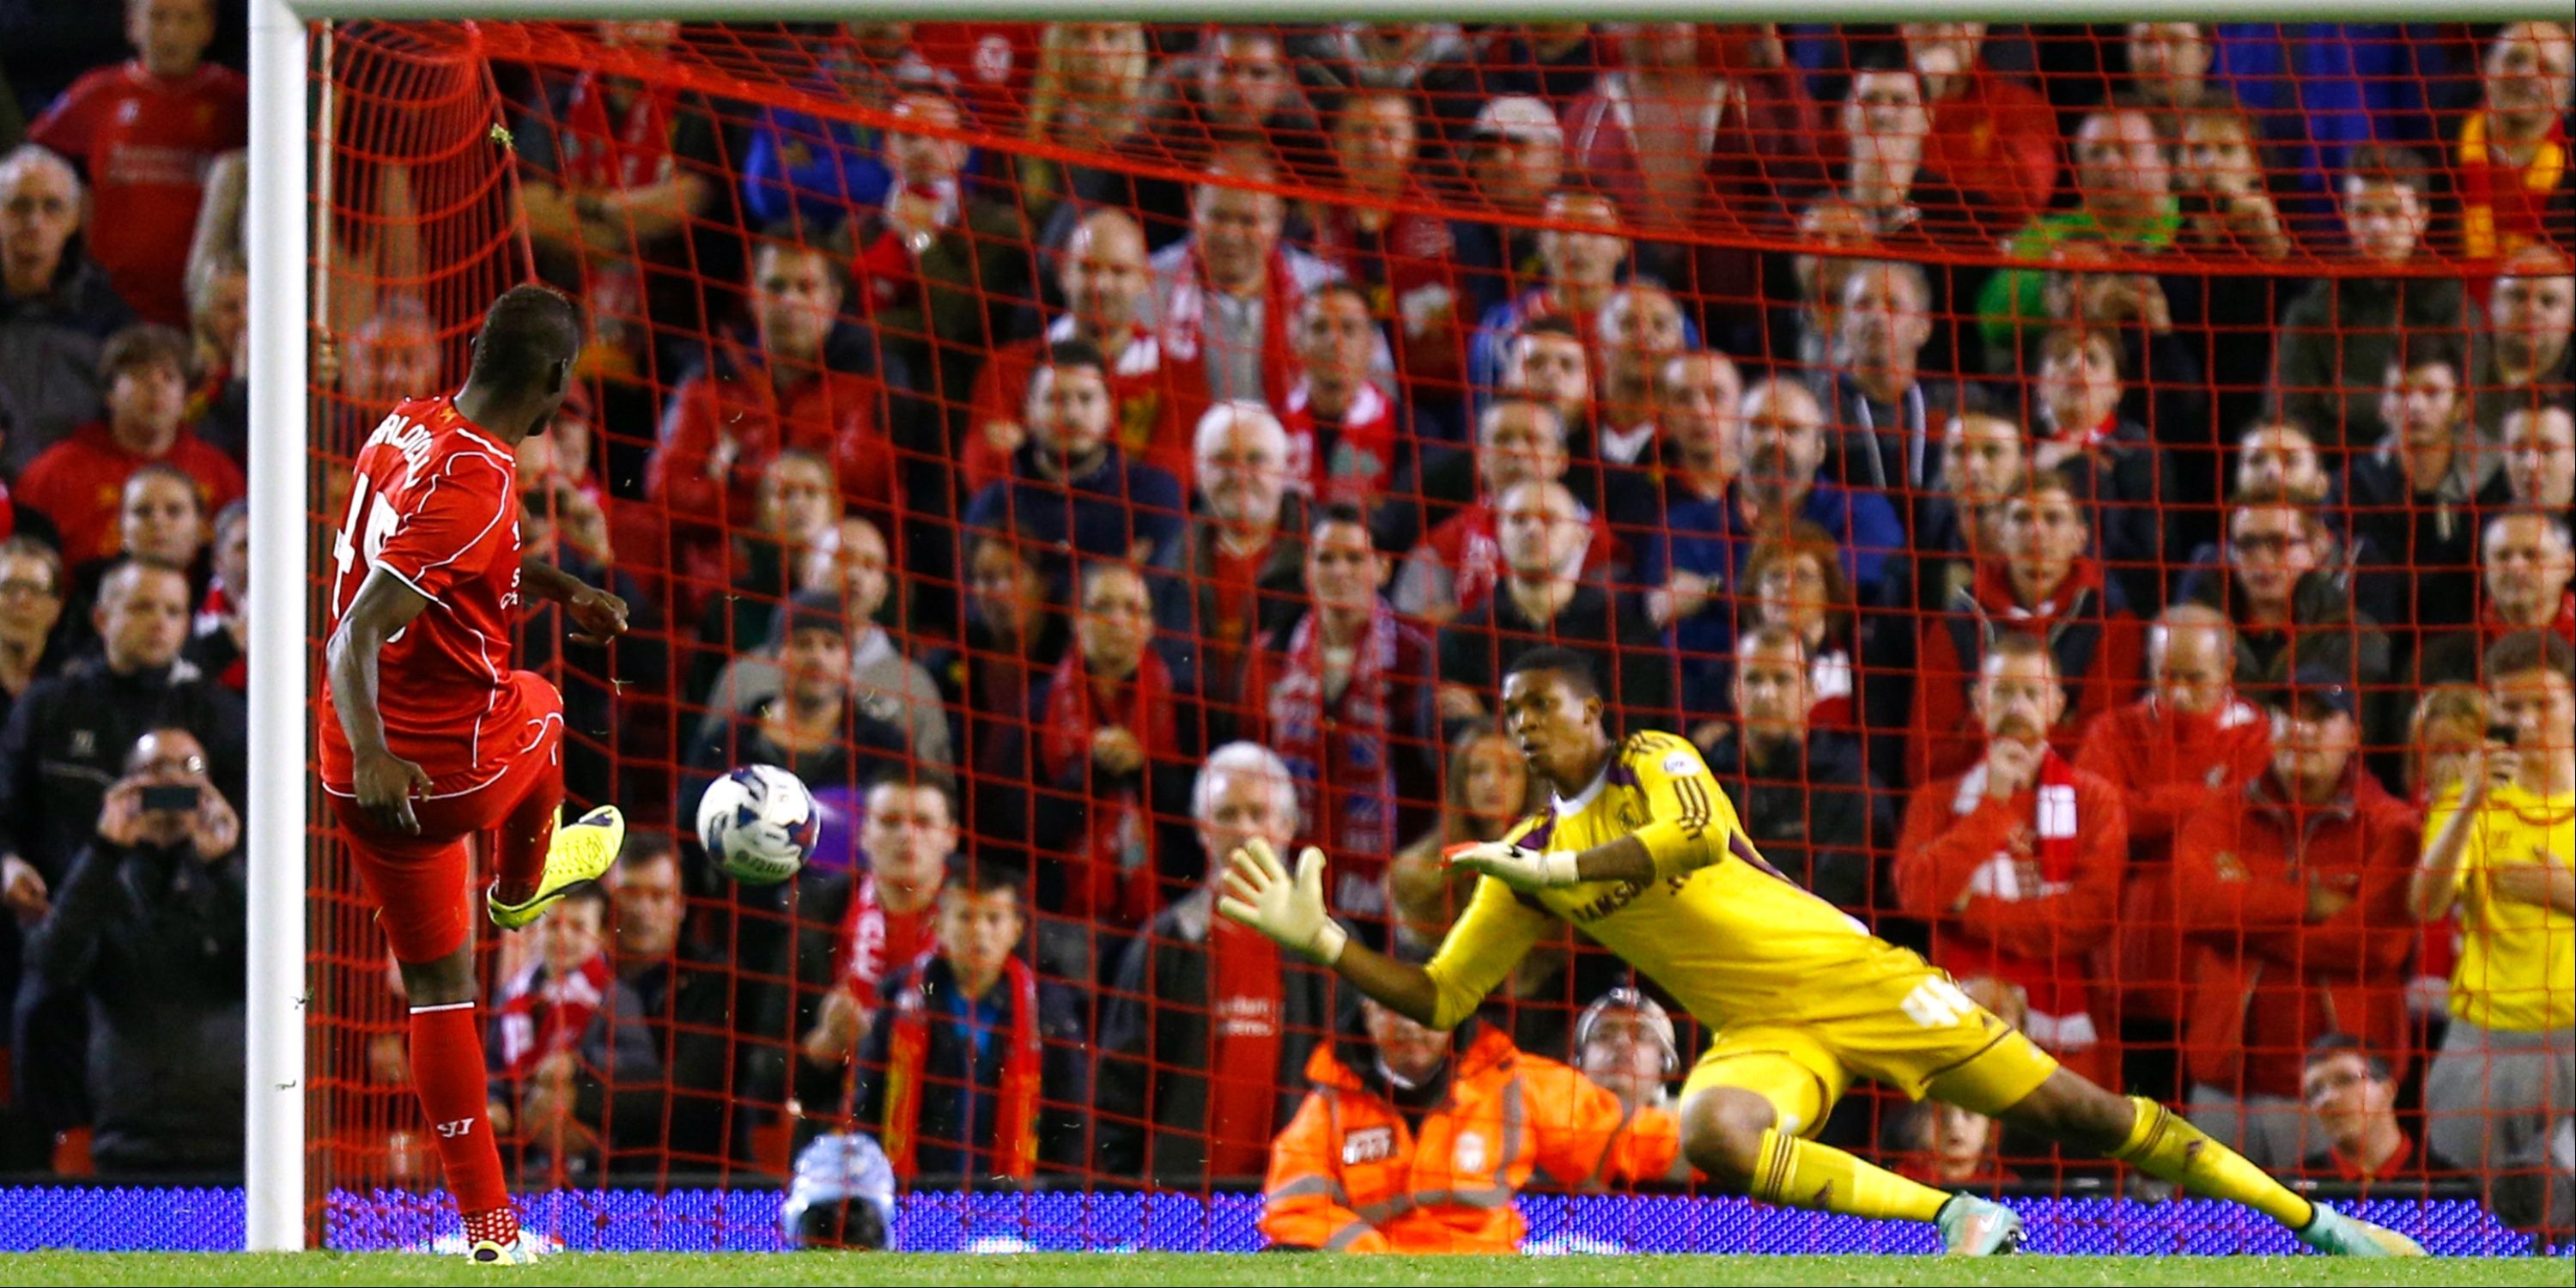 Liverpool's Mario Balotelli scores a penalty for Liverpool against Middlesbrough.